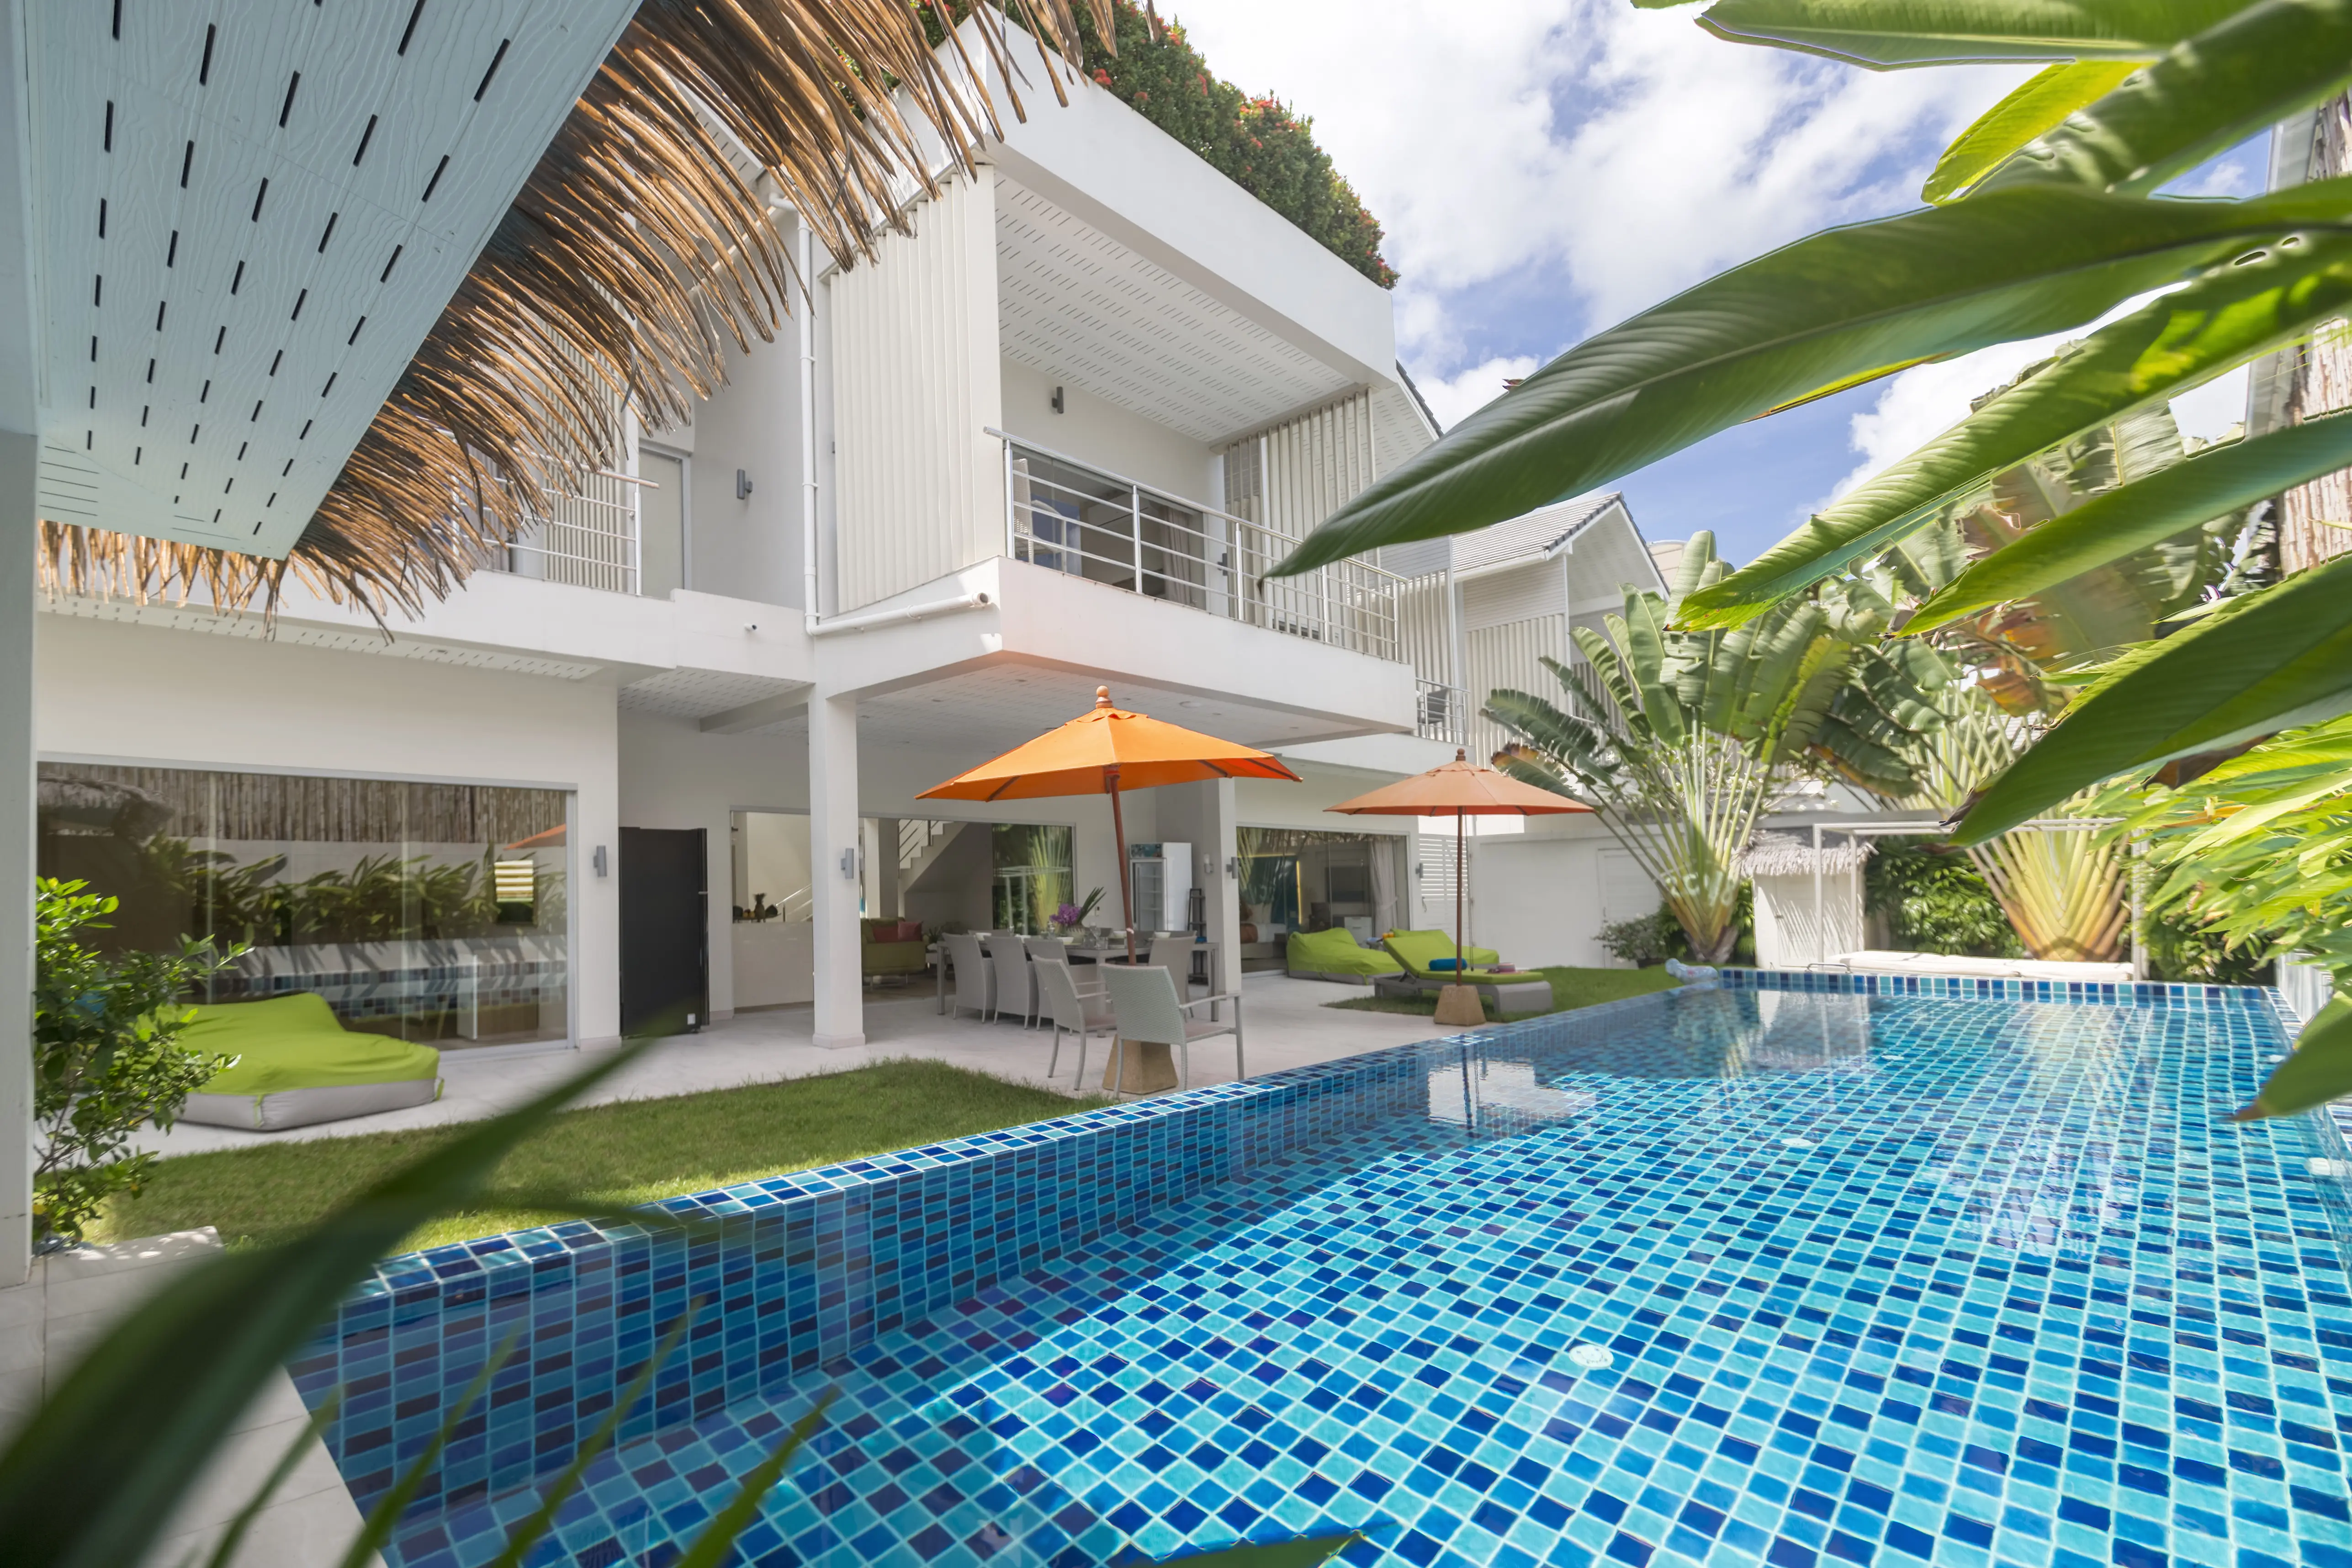 Villas "Villa Mojito – Beachside 5 Bedroom Pool Villa in Ban Tai for sale" 5 bedrooms, 5 showers, private pool, walking distance to the beach, district Baan Tai, 